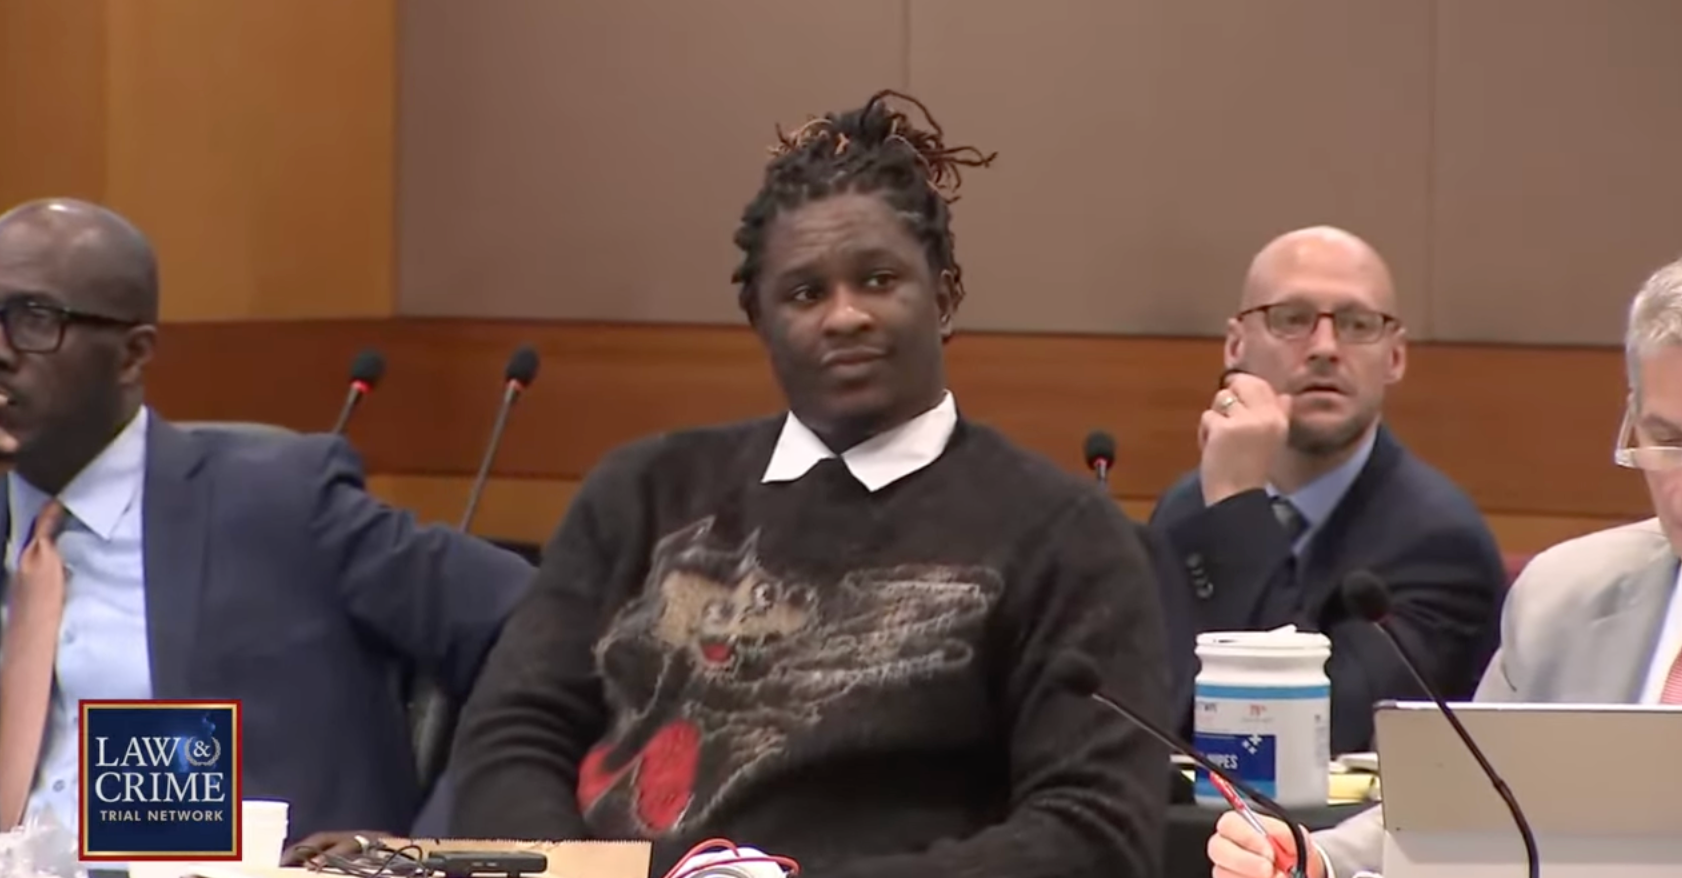 Young Thug in court on Monday, 4 December, wearing a sweater with a wolf design.